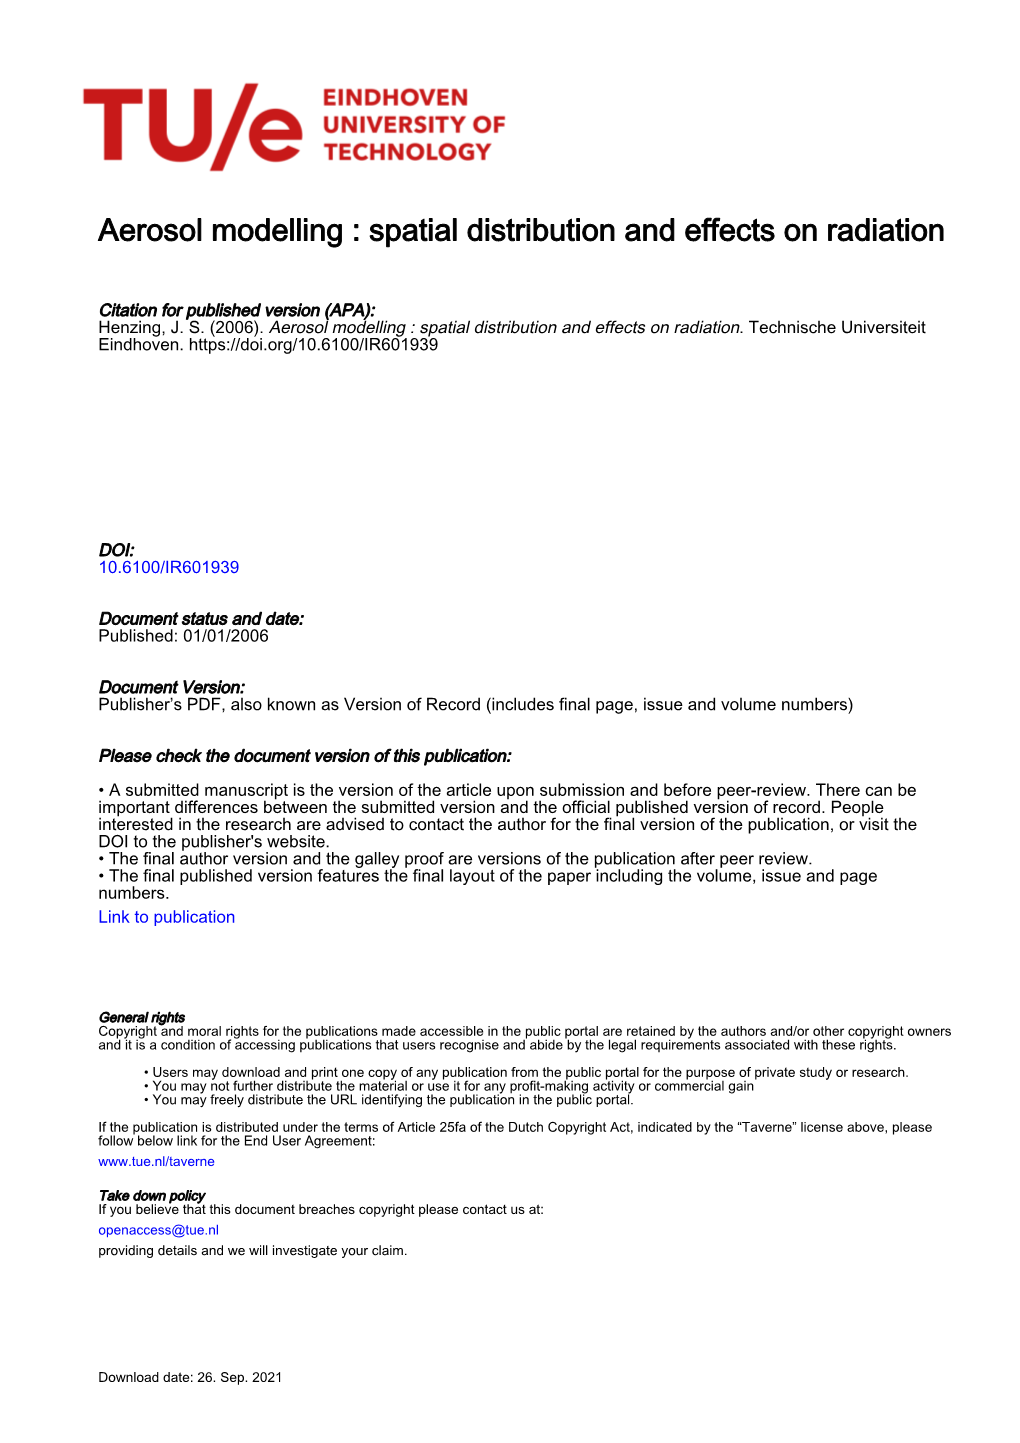 Aerosol Modelling : Spatial Distribution and Effects on Radiation